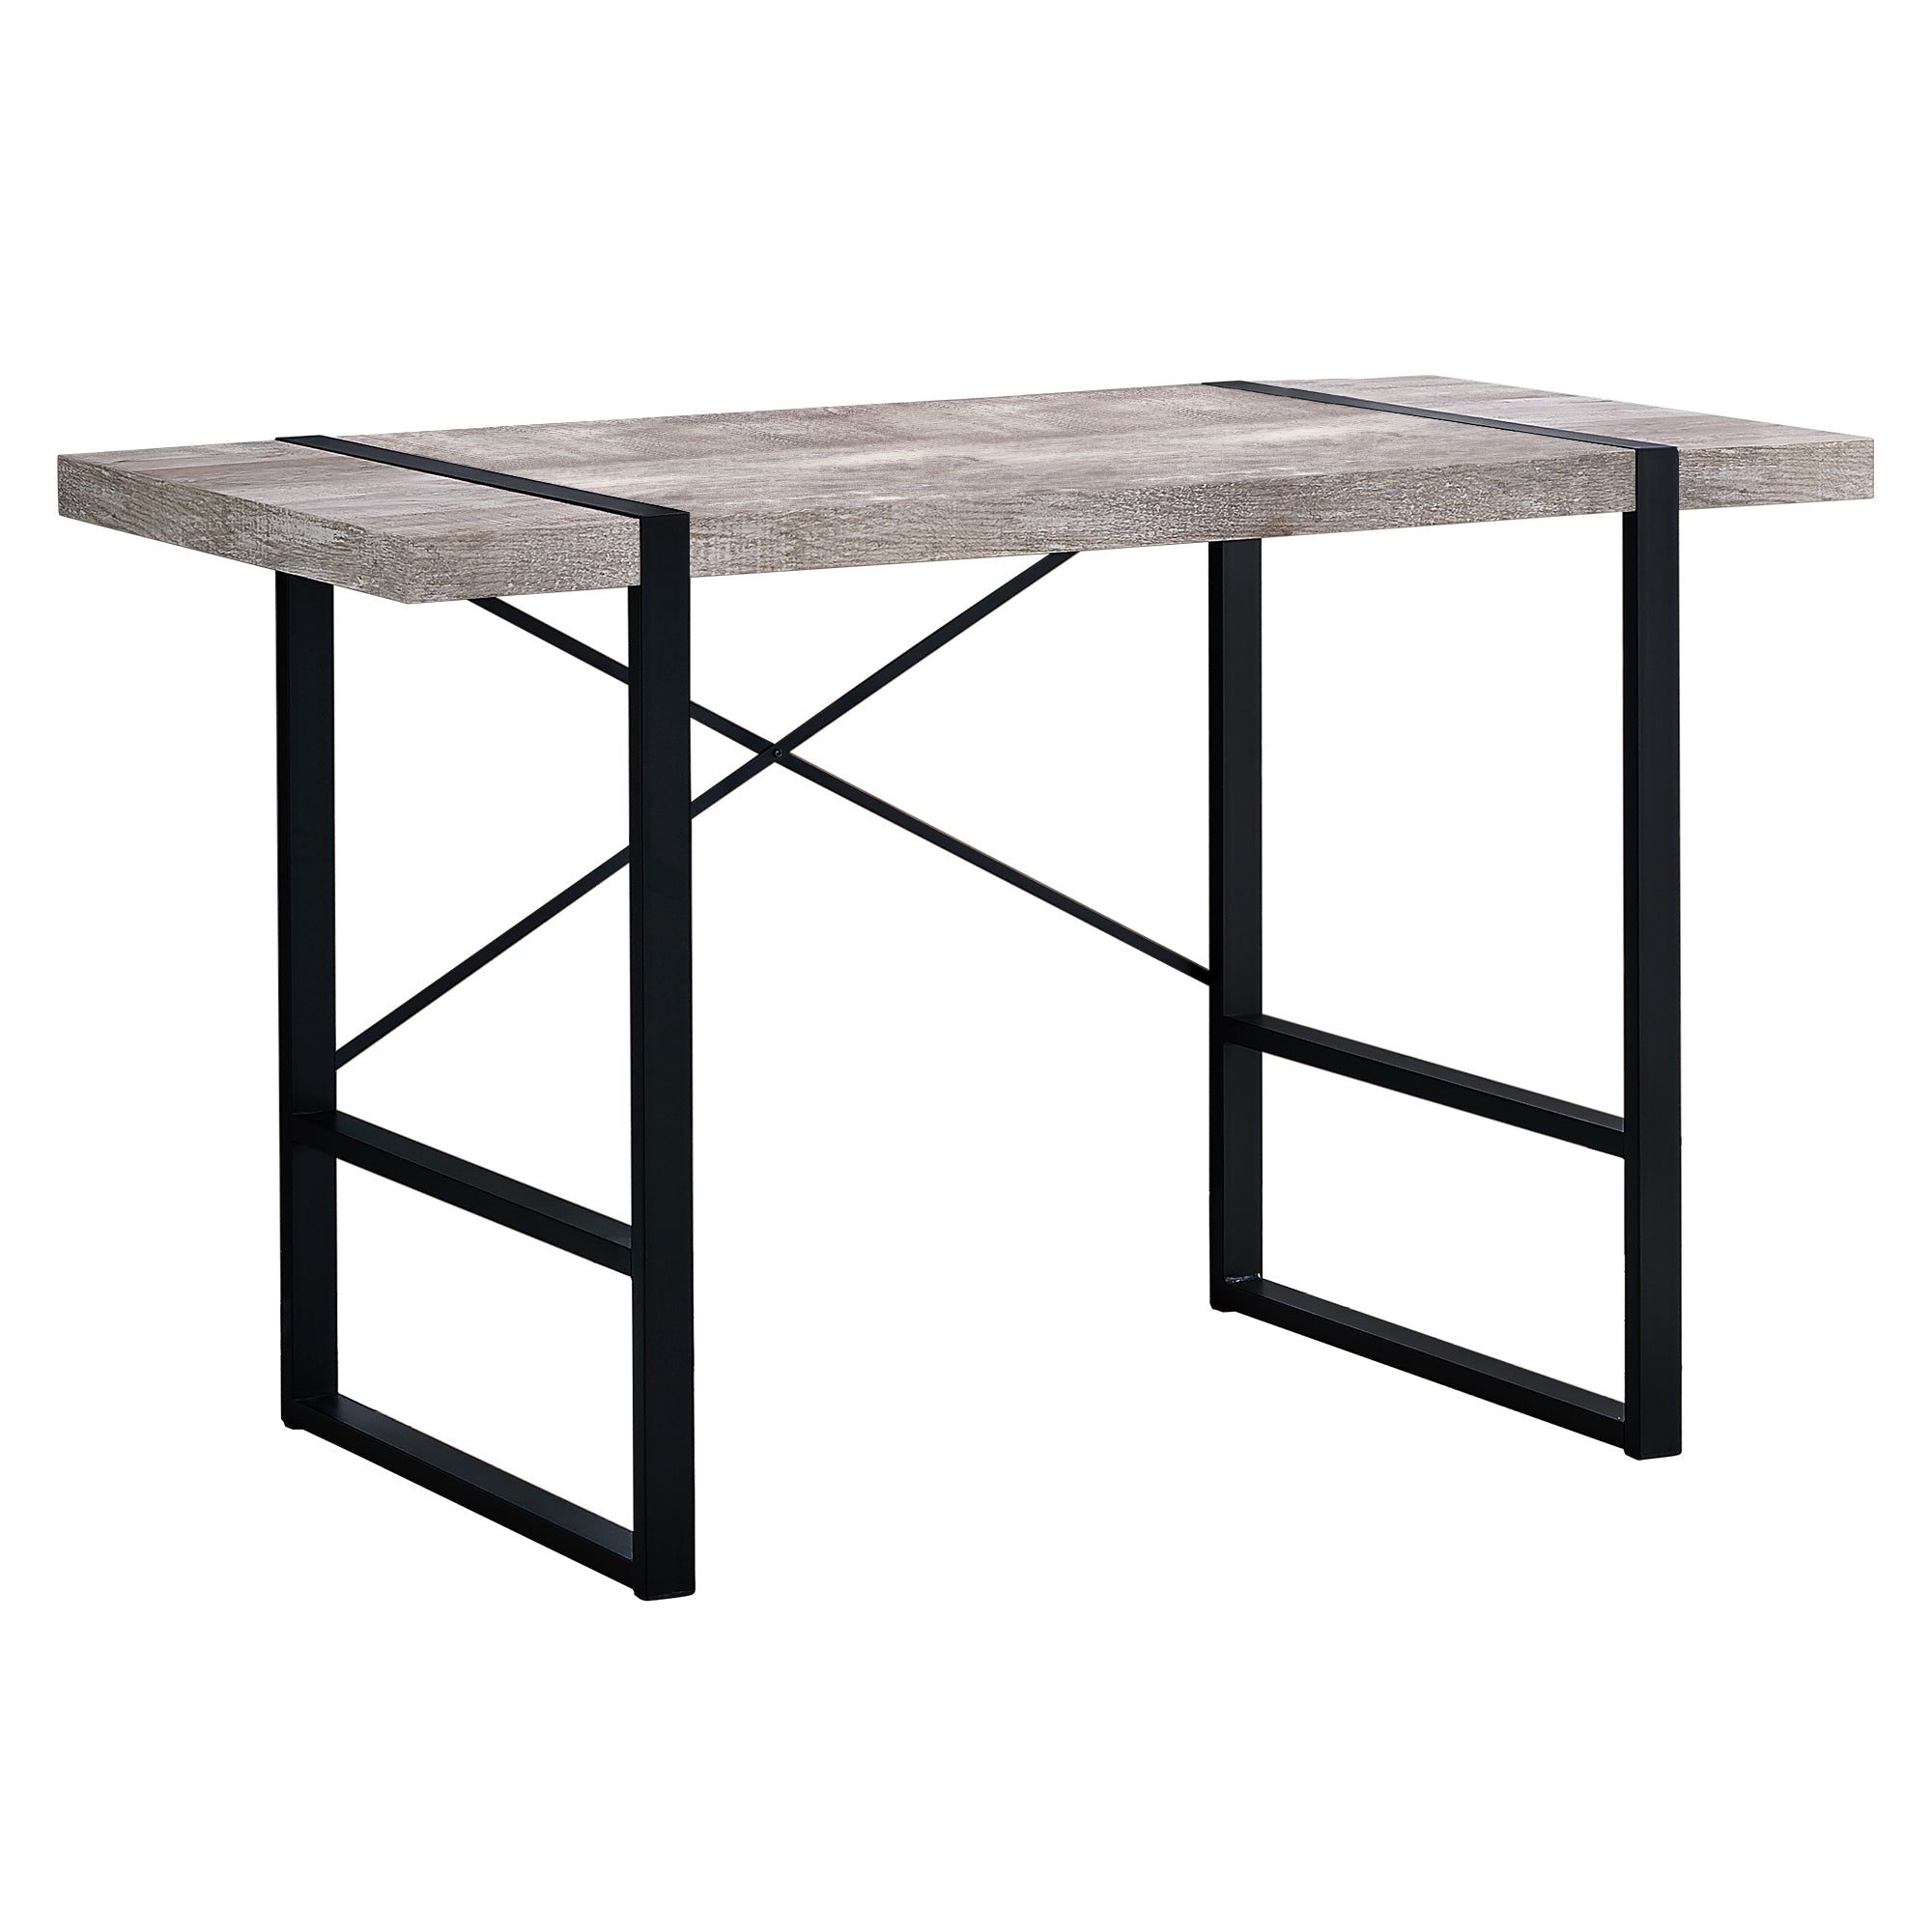 MN-167315    Computer Desk, Home Office, Laptop, 48"L, Metal, Laminate, Taupe Reclaimed Wood Look, Black, Contemporary, Modern